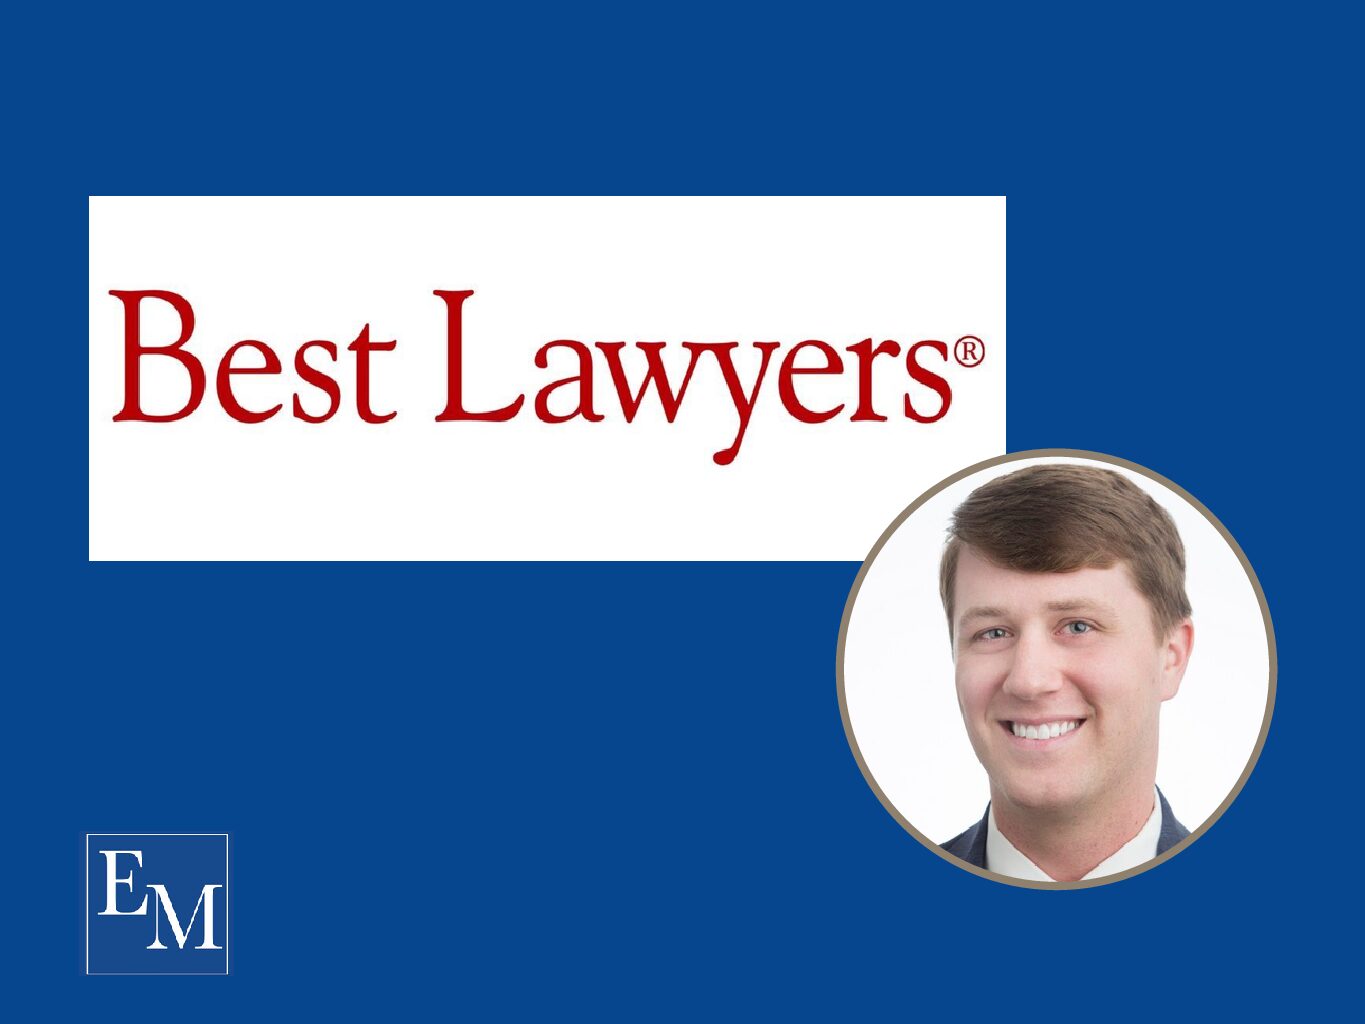 Egerton, McAfee, Armistead & Davis, P.C. is pleased to announce that Jeremy D. Miller has been included in the 2021 Edition of Best Lawyers; Ones to Watch.